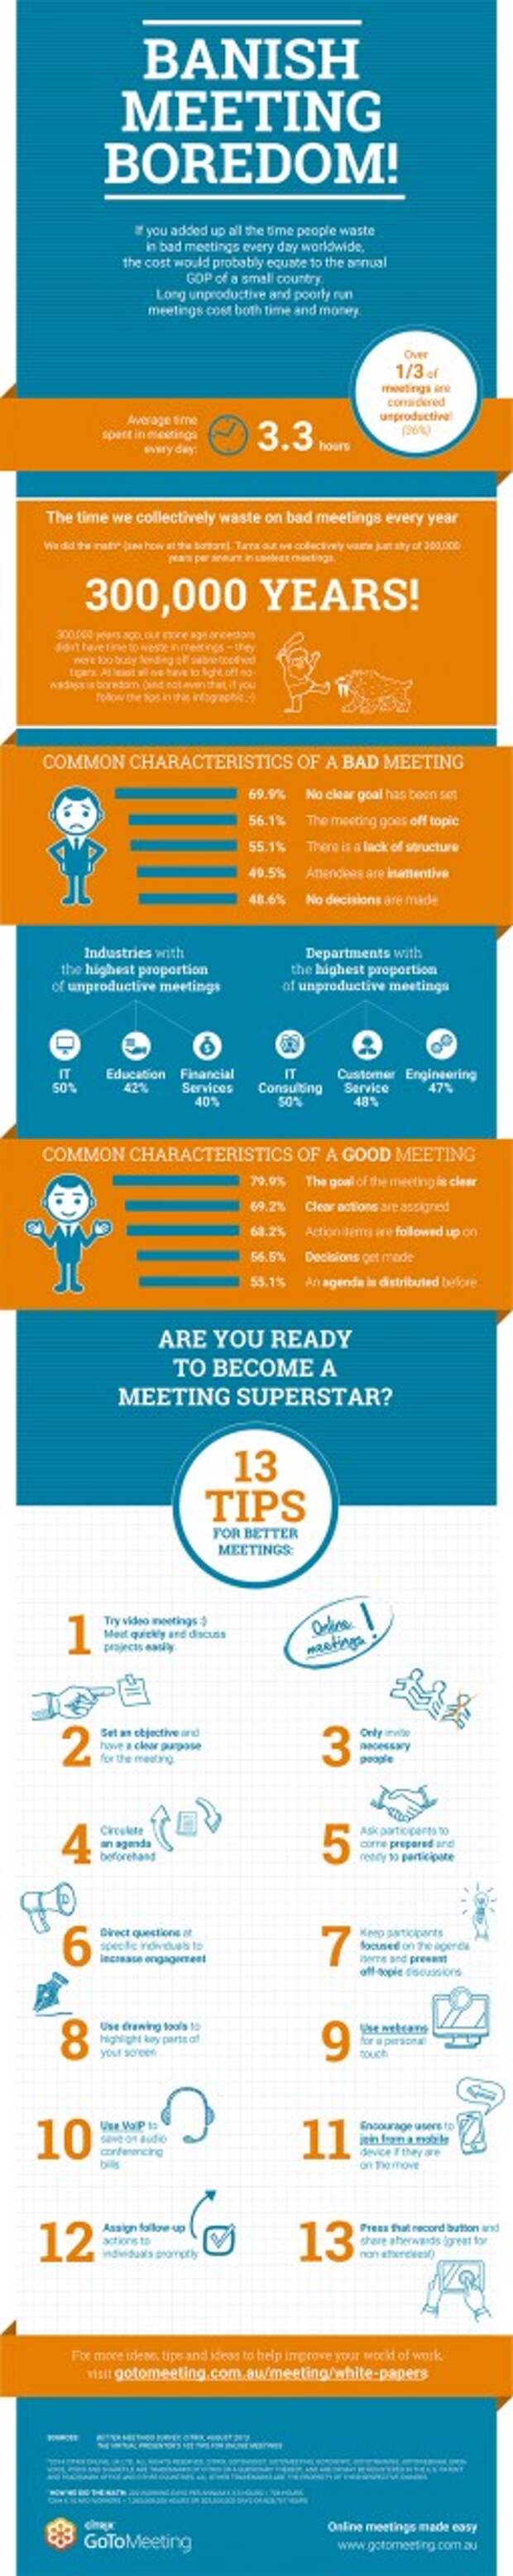 468AU_Infographic_Insiders-Guide-To-Better-Meetings (australia)